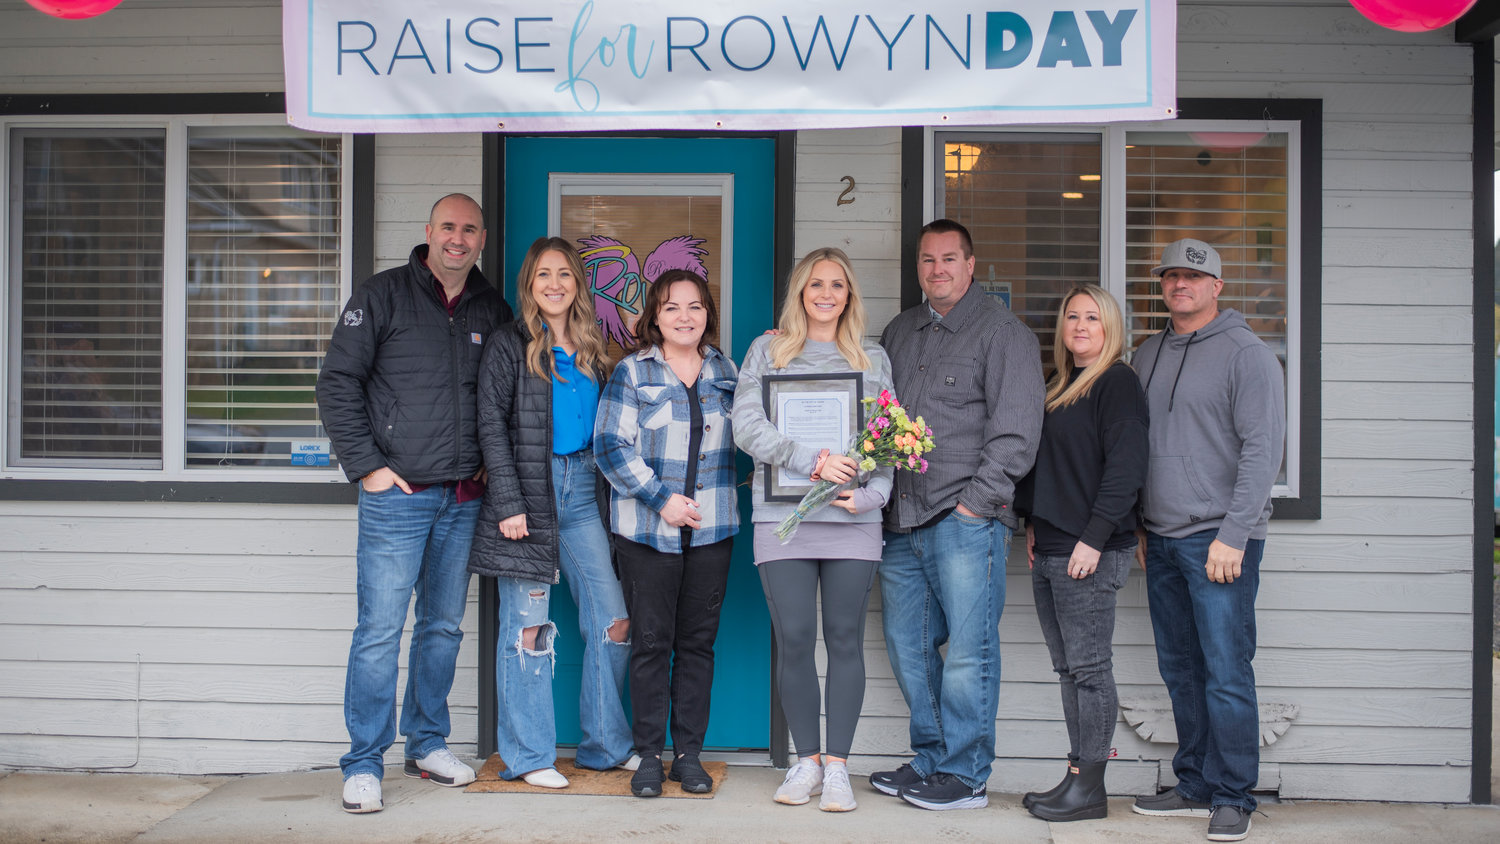 Board members pose for a photo with Brynn Johnson Tuesday during an event honoring Raise for Rowyn Day in Tenino.